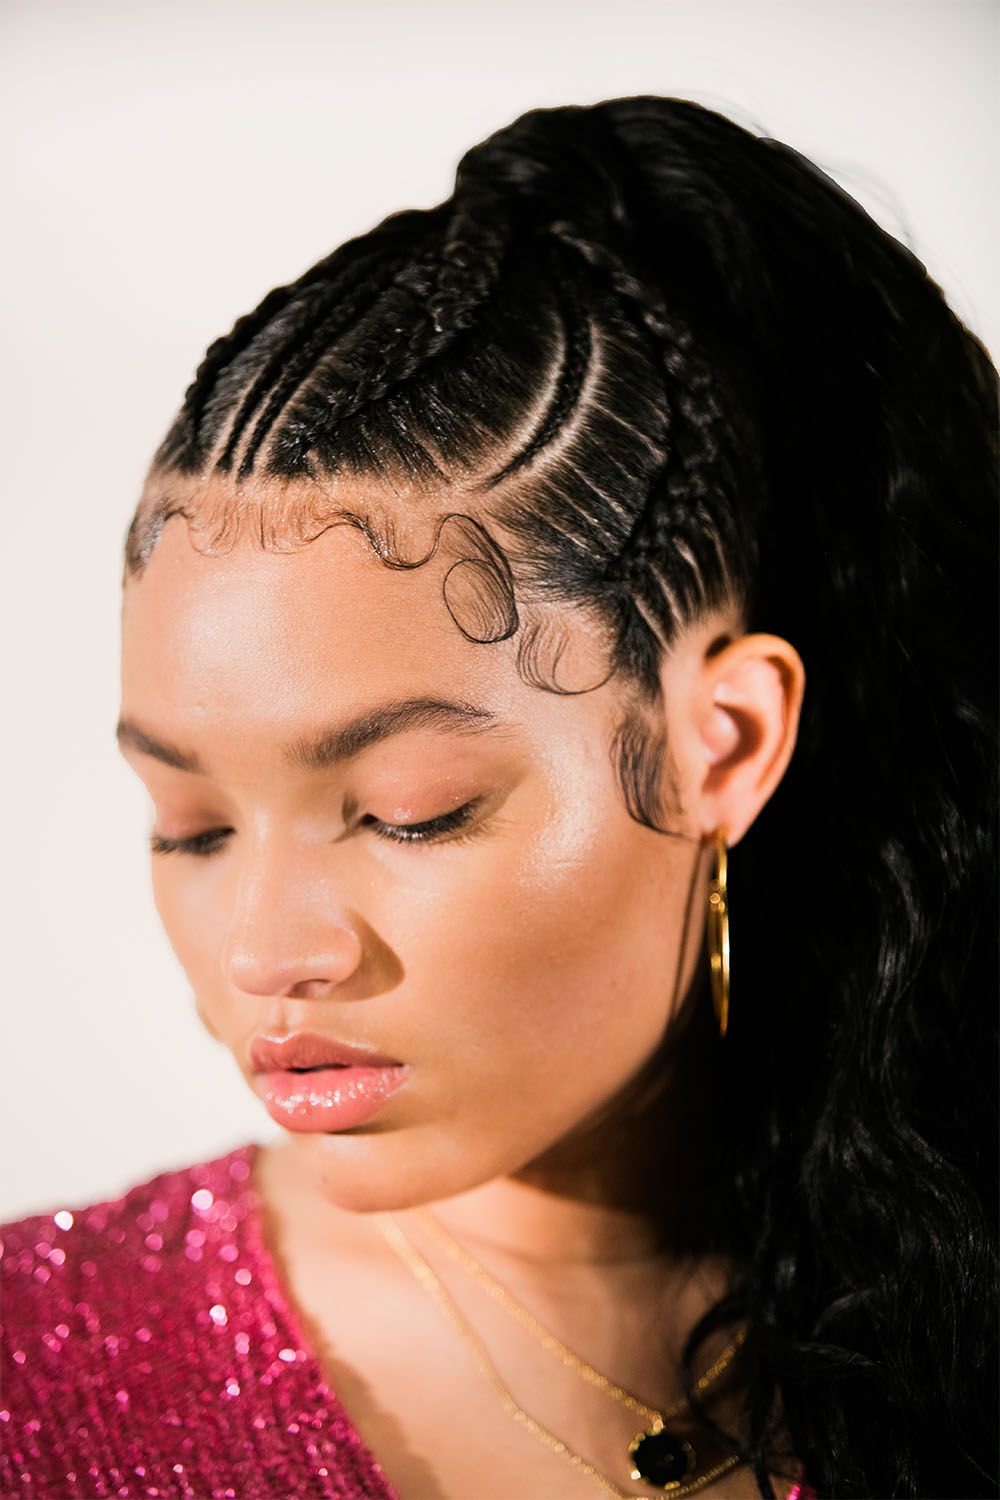 How to Create Braided Pony with Weave Hairstyle - Cosmo's The Braid Up